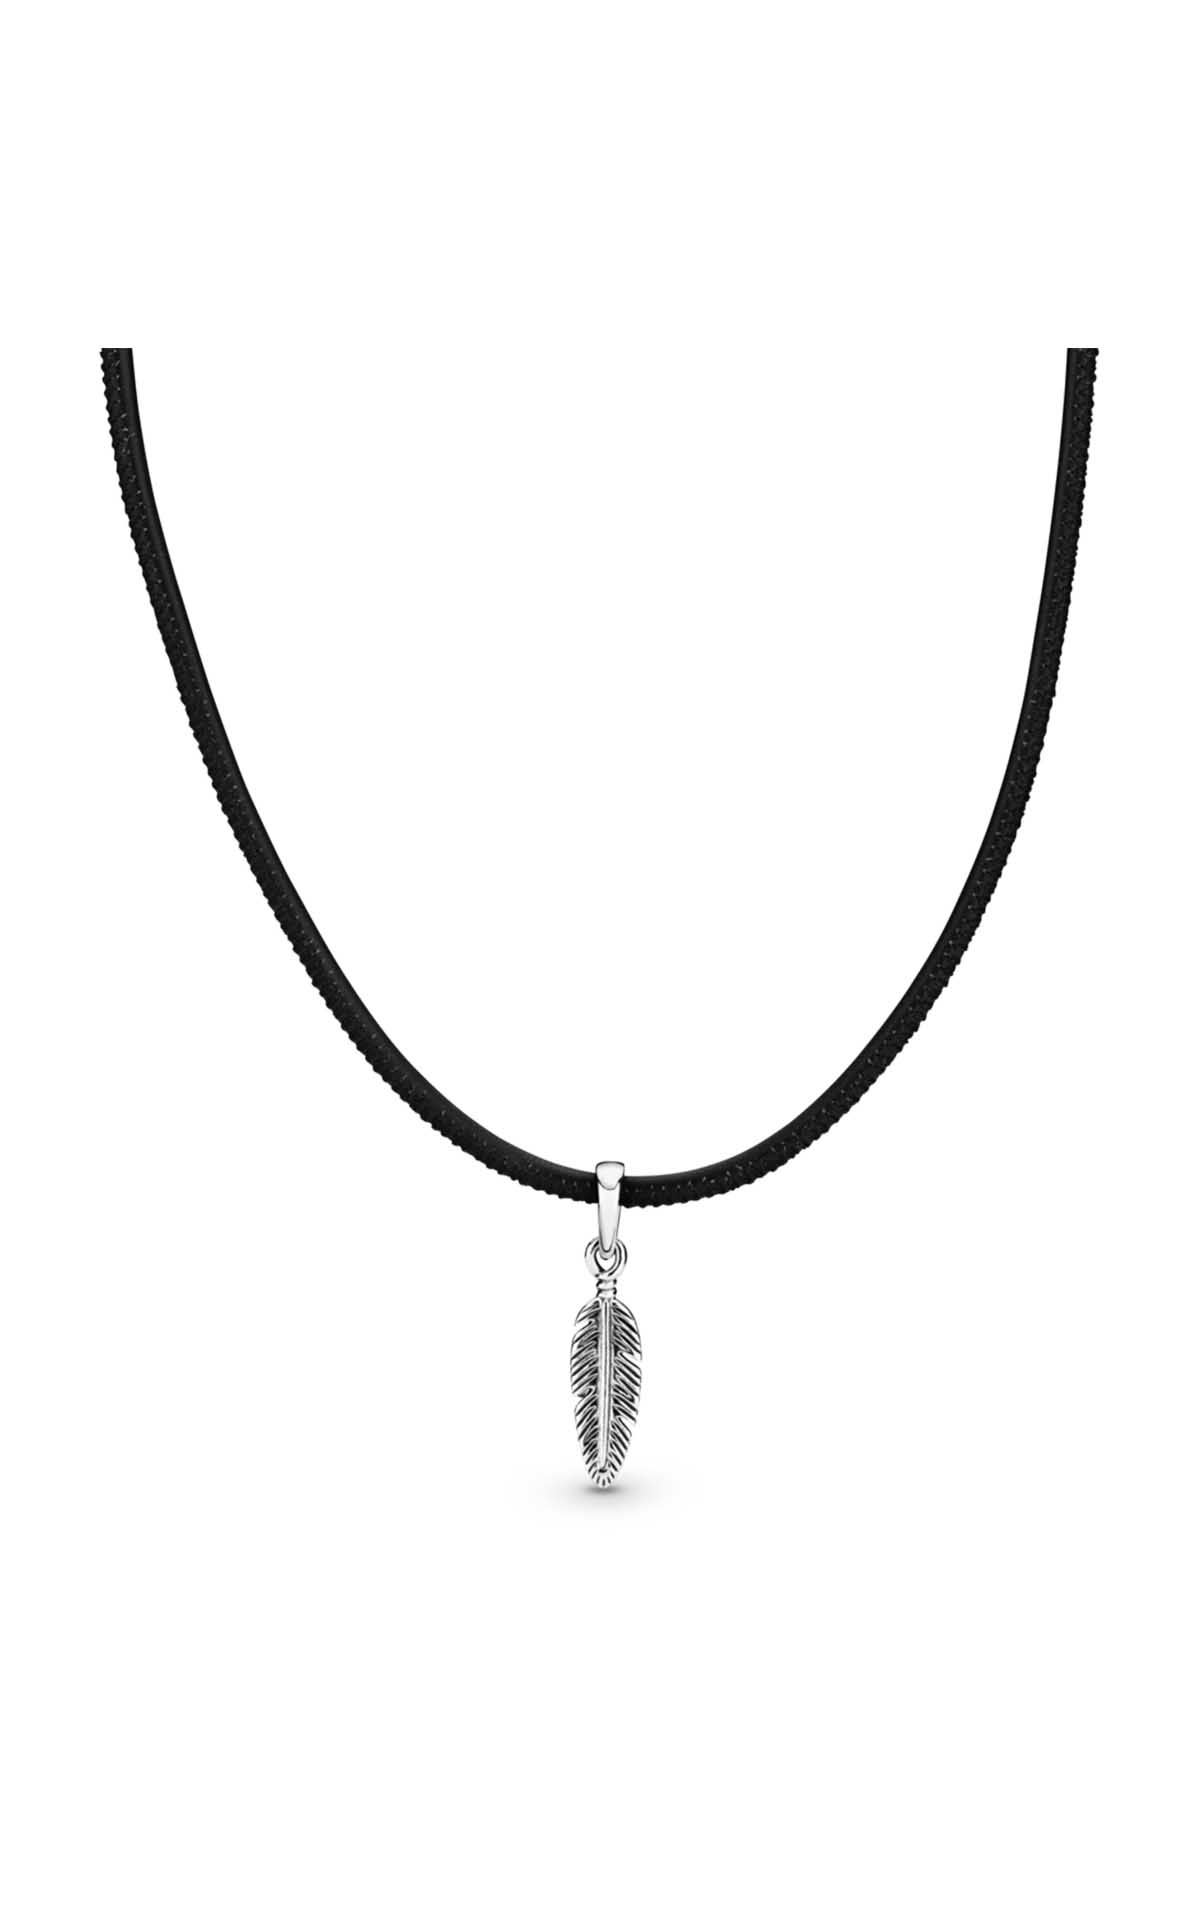 Choker necklace with silver feather pendant Pandora